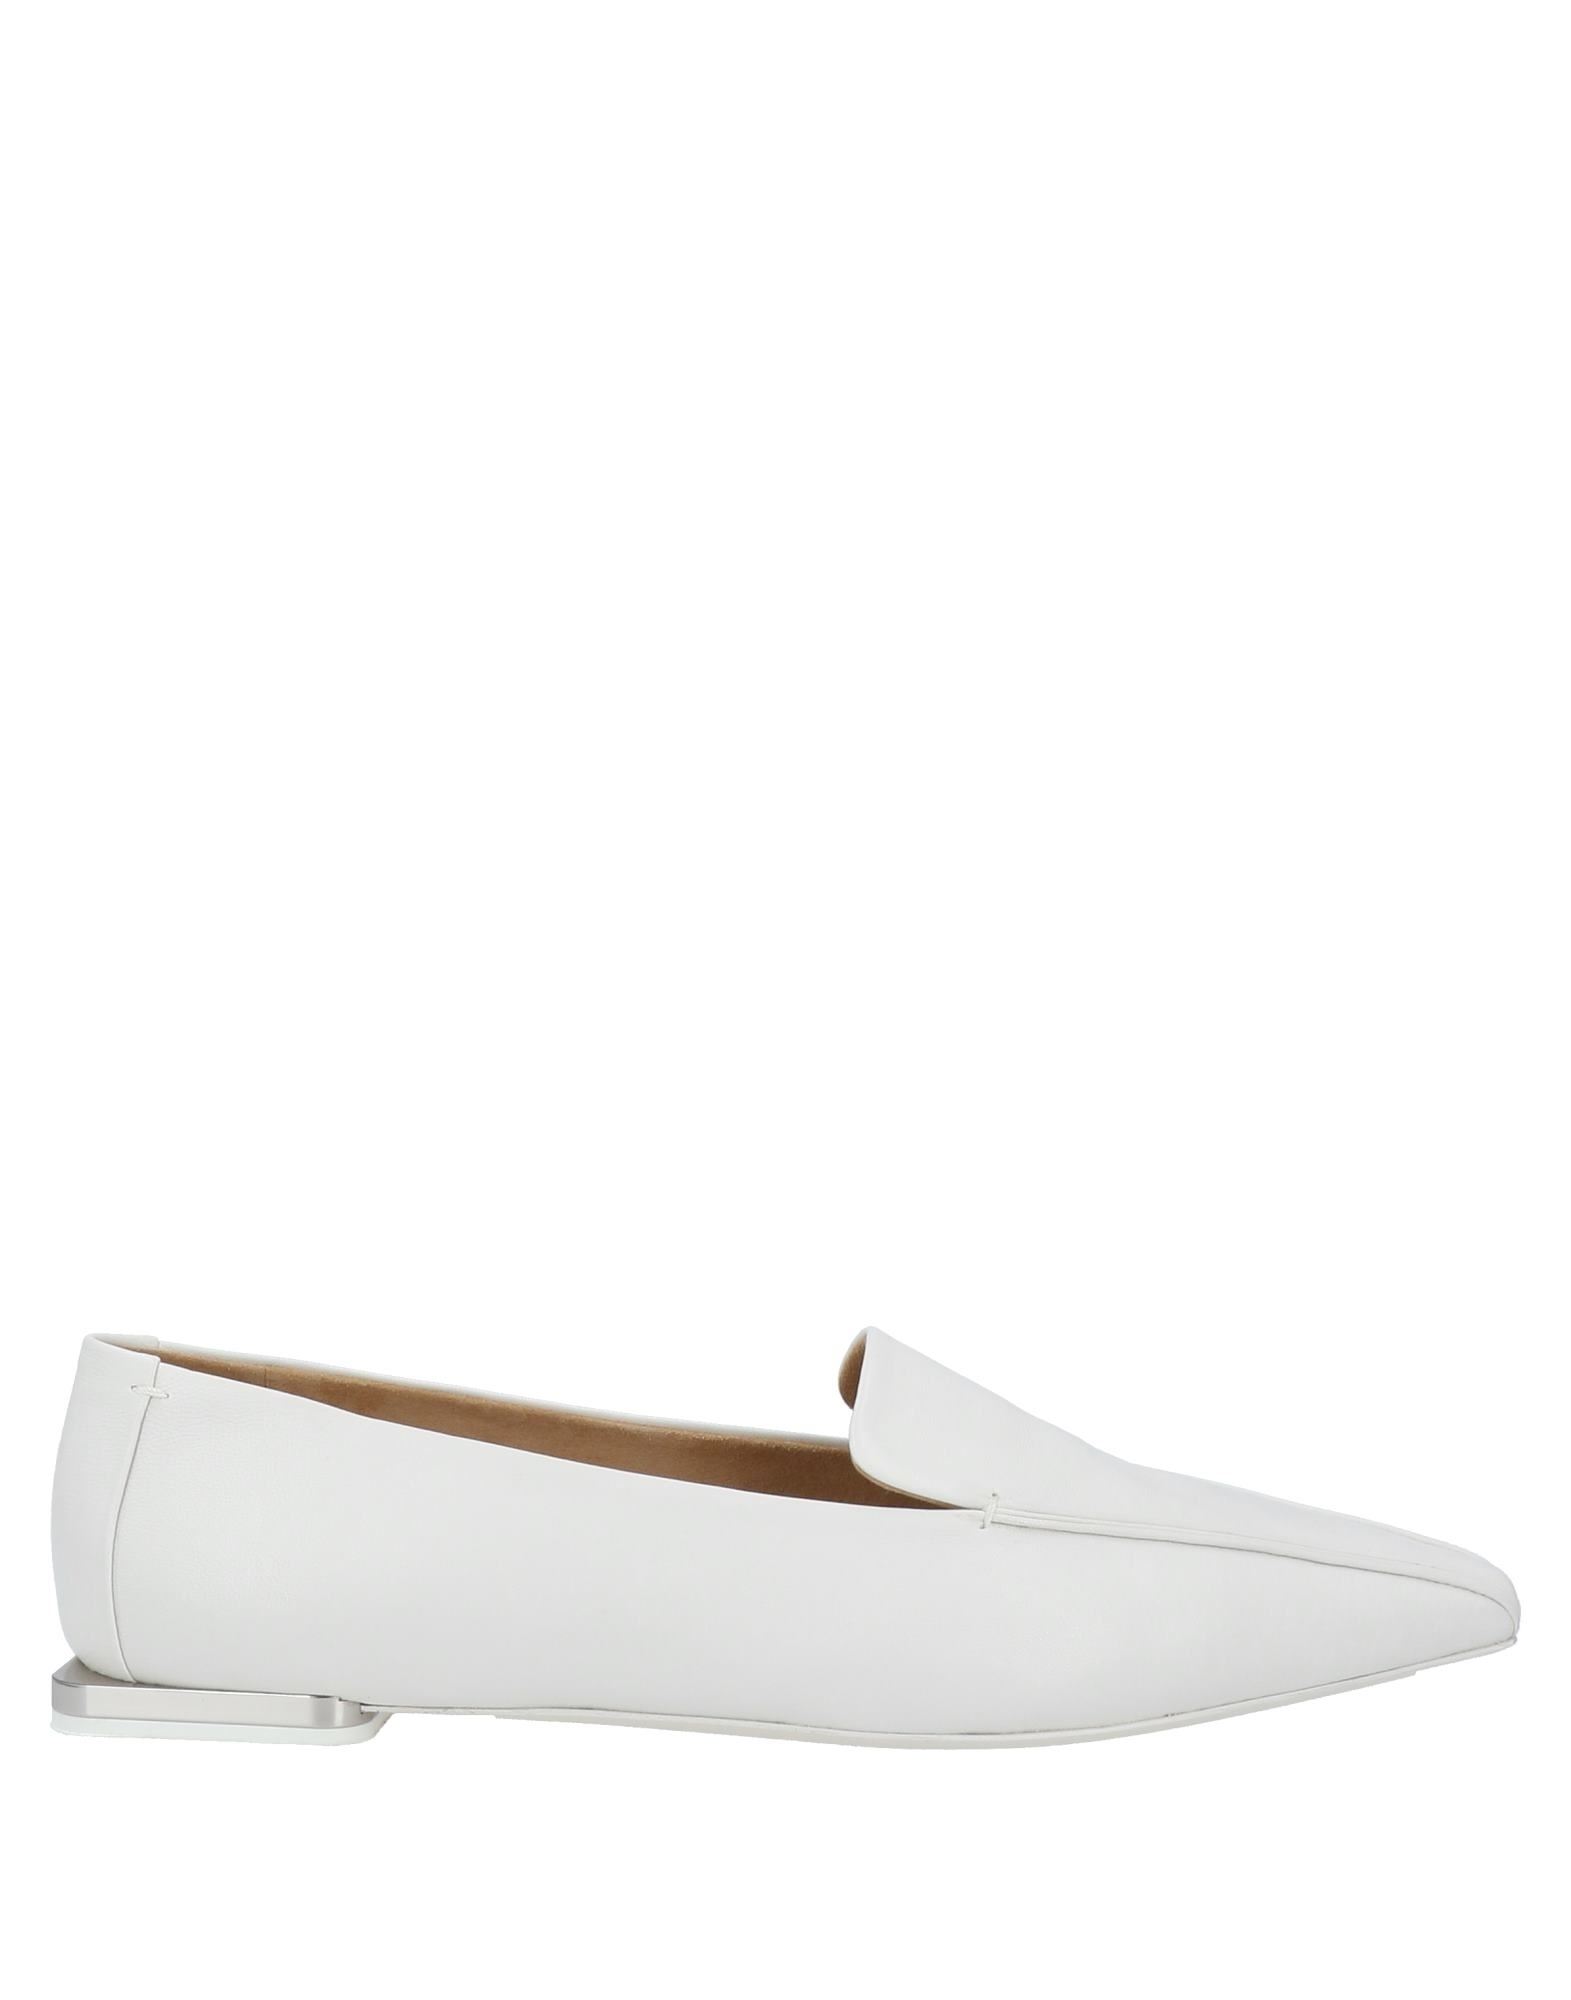 Max Mara Loafers In White